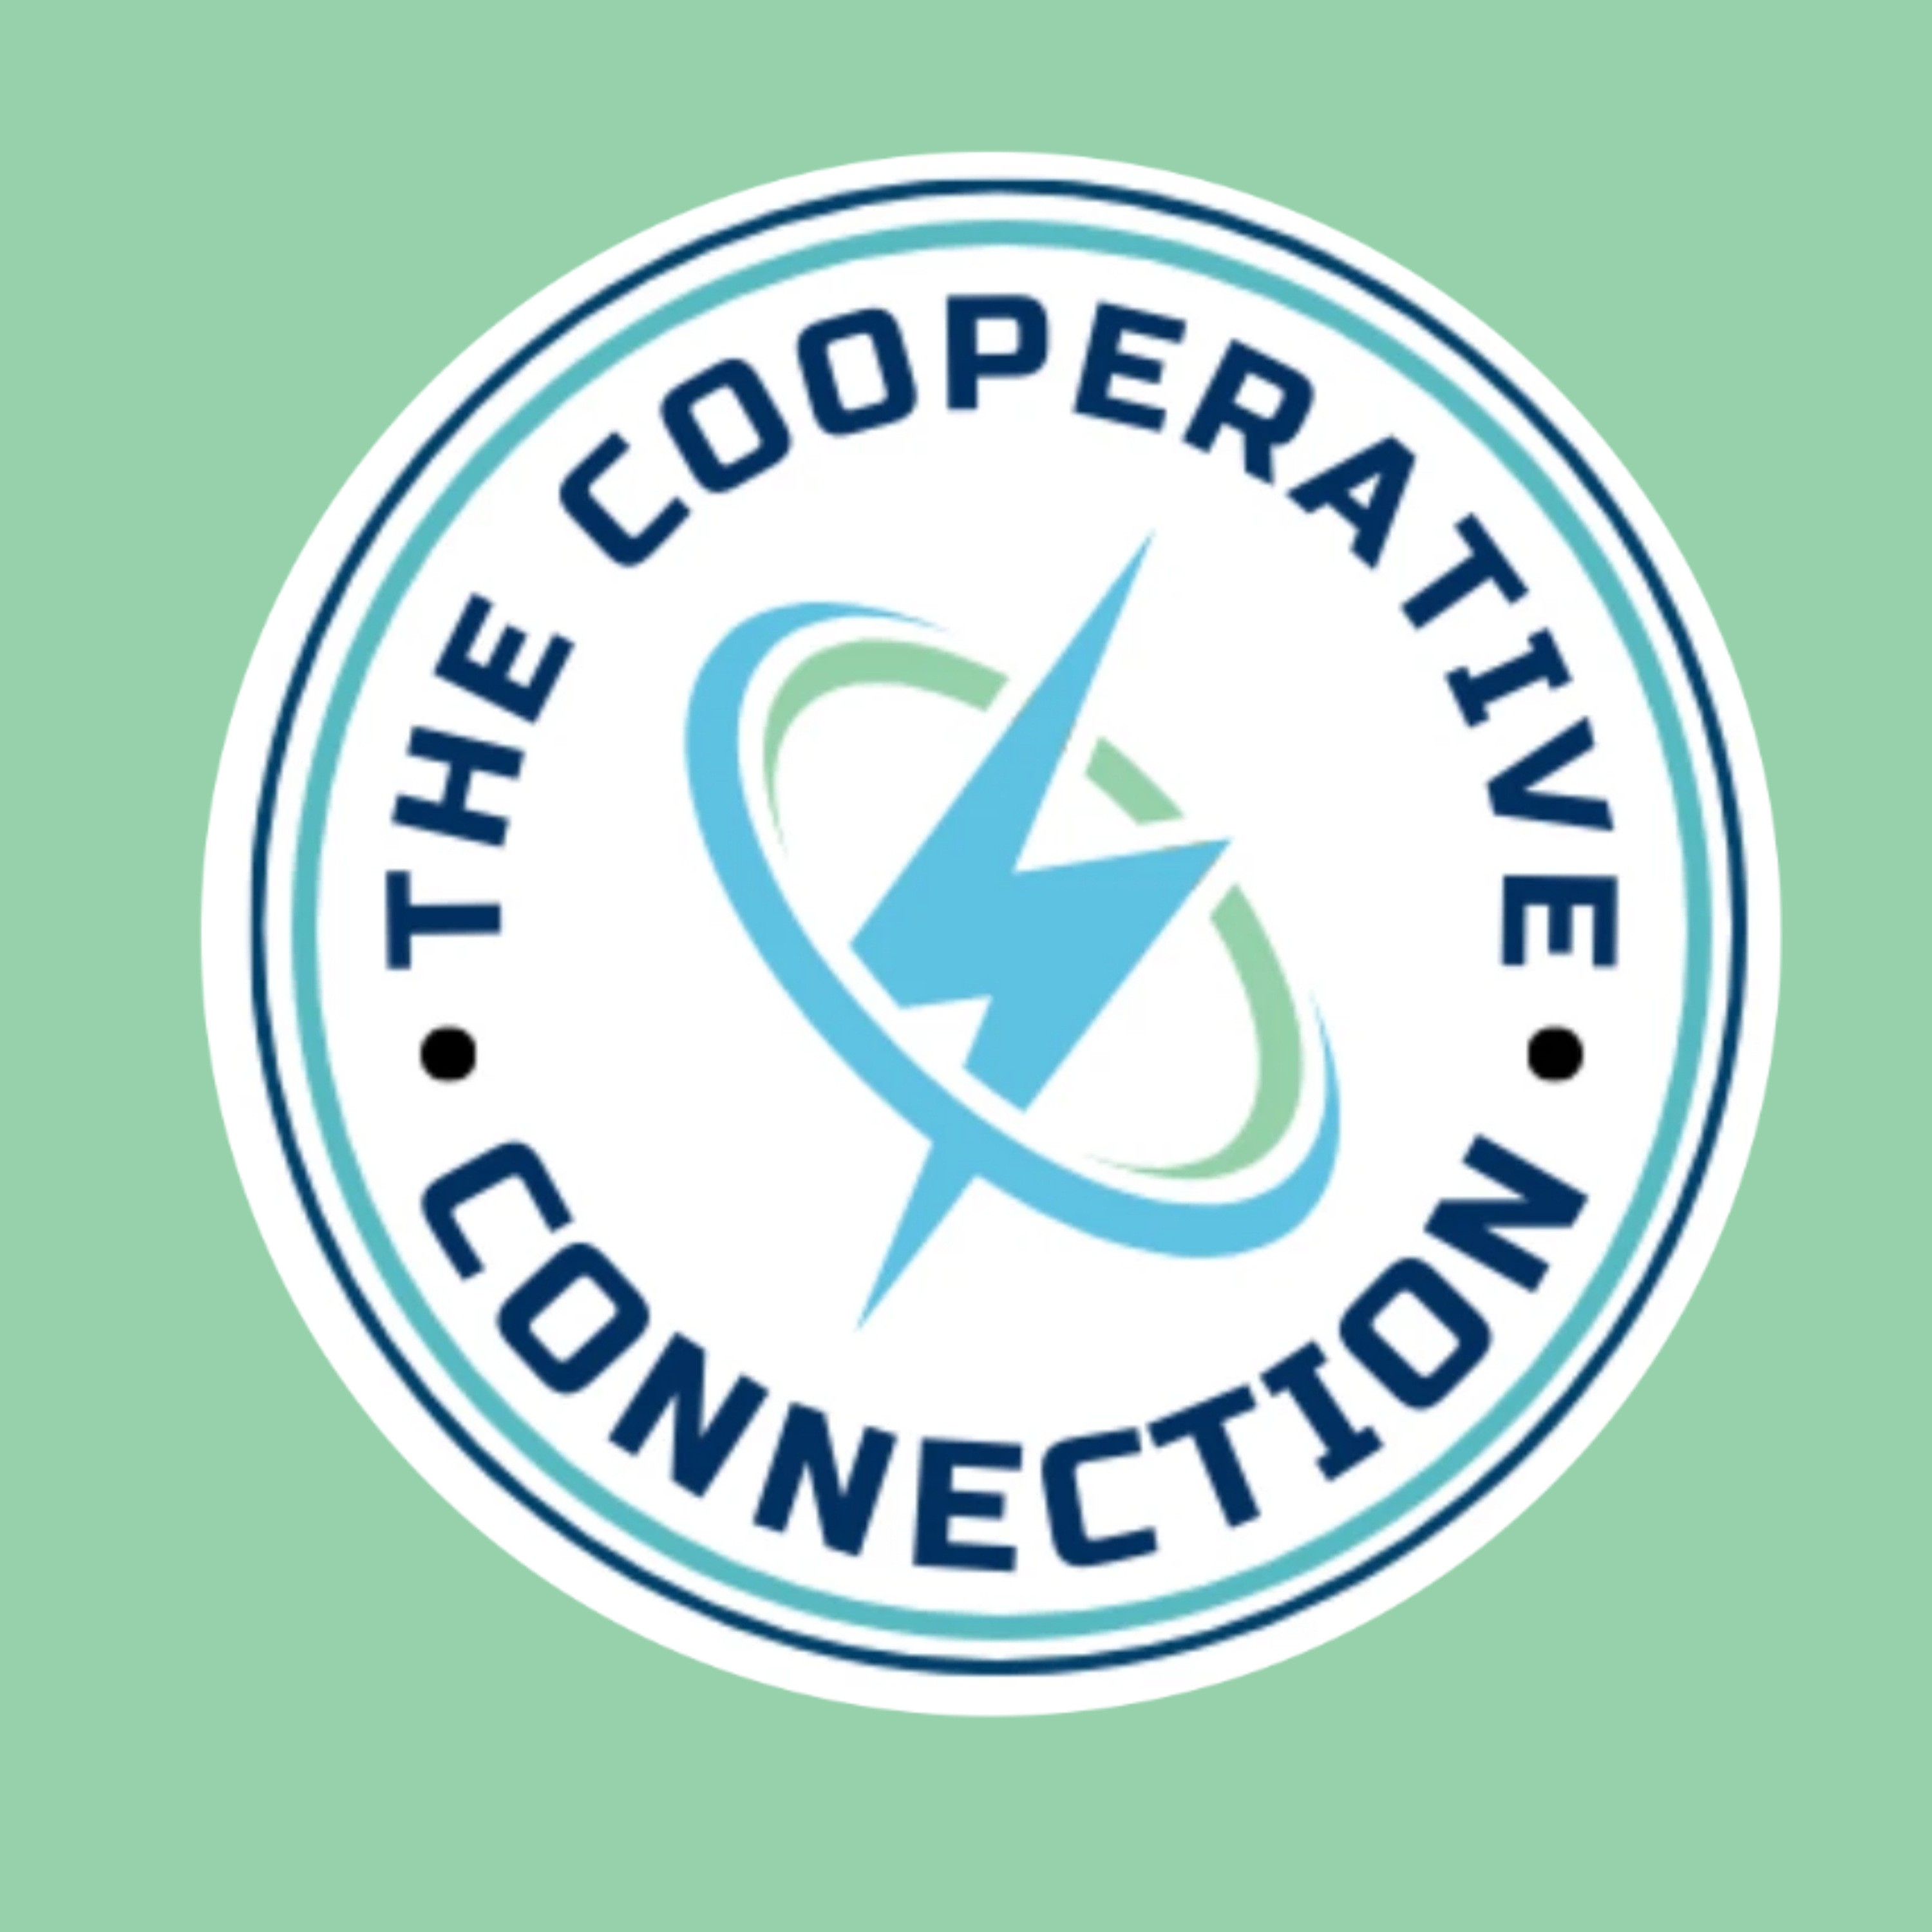 The Cooperative Connection